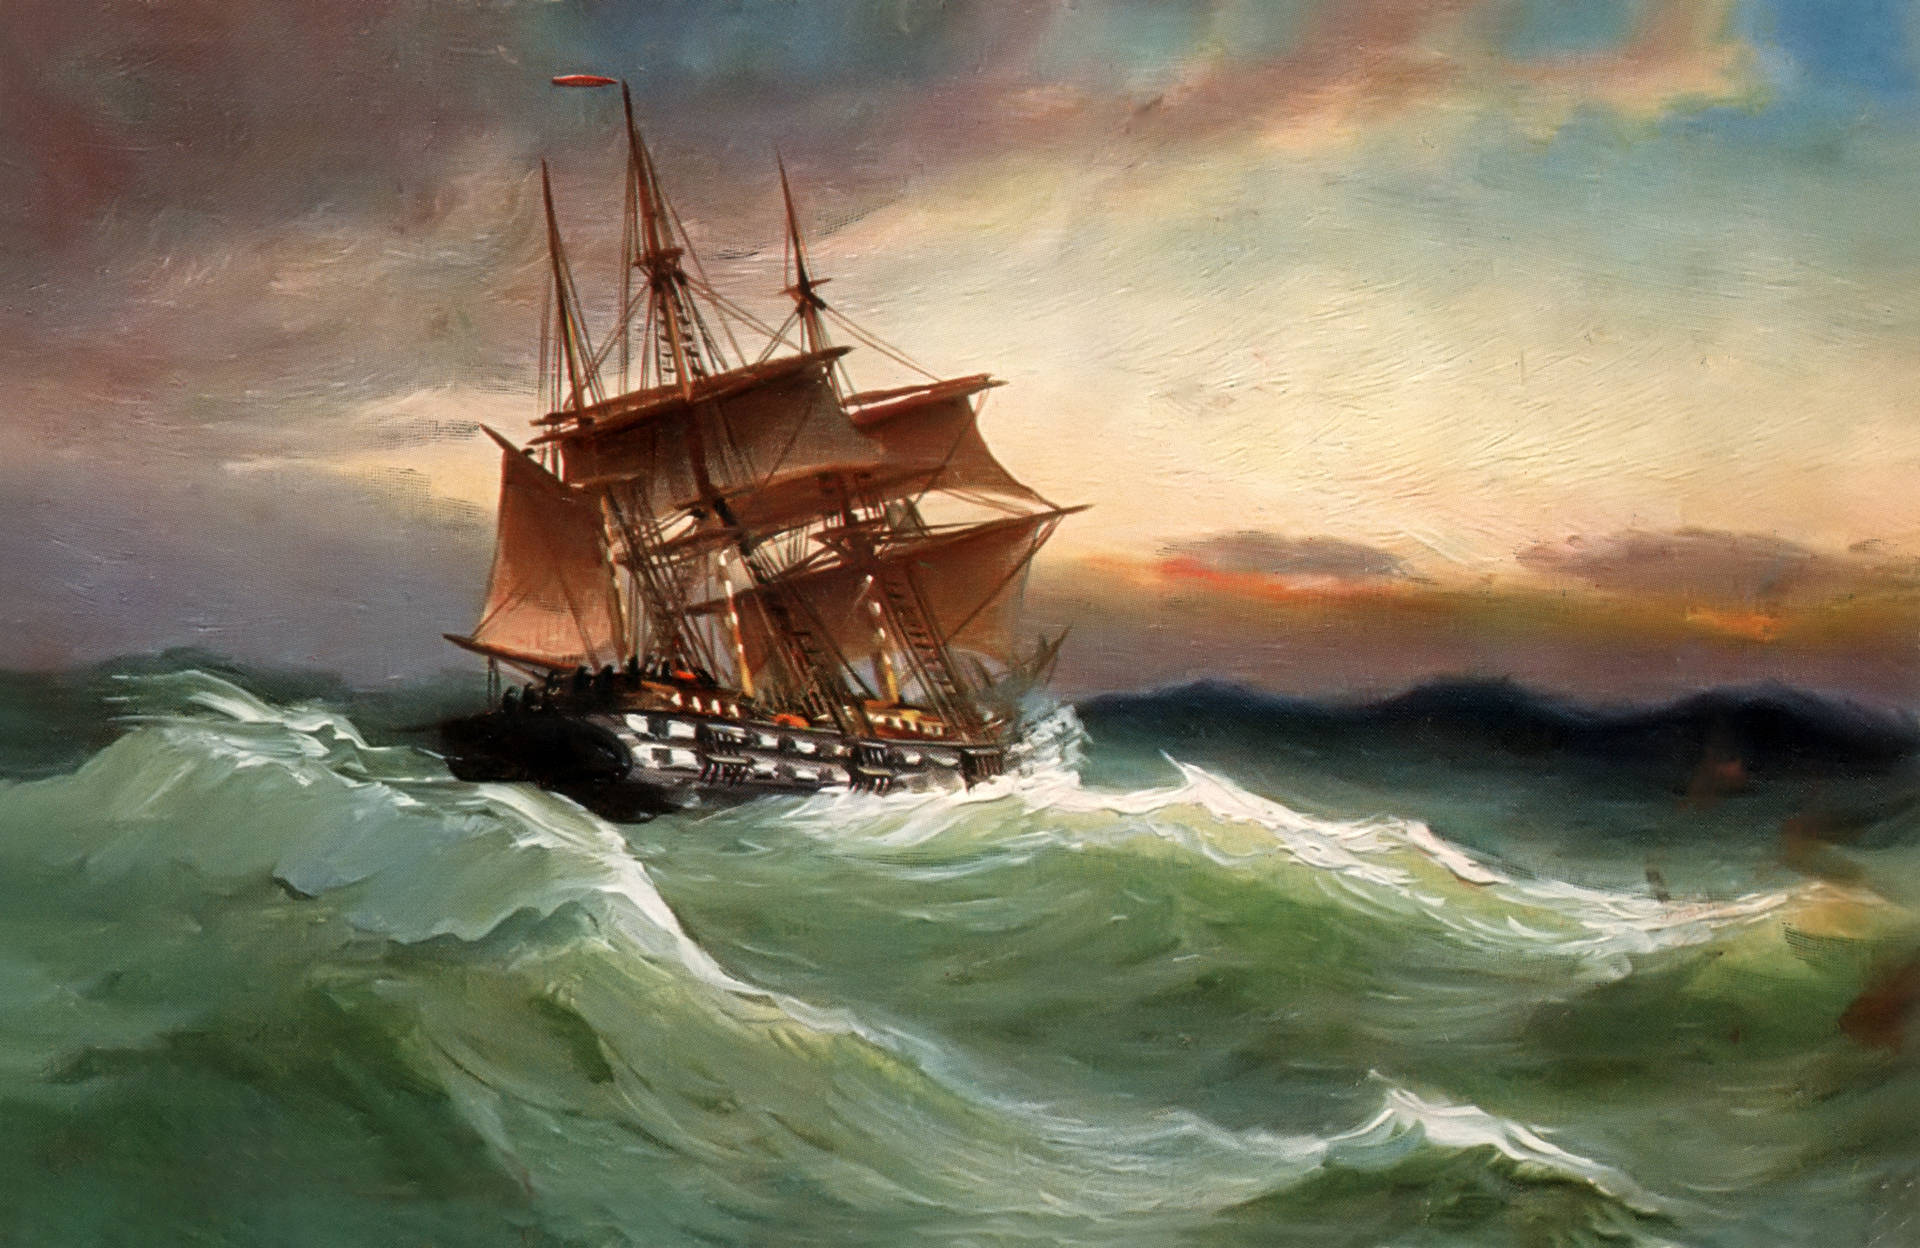 Sailing On Stormy Seas Painting Wallpaper